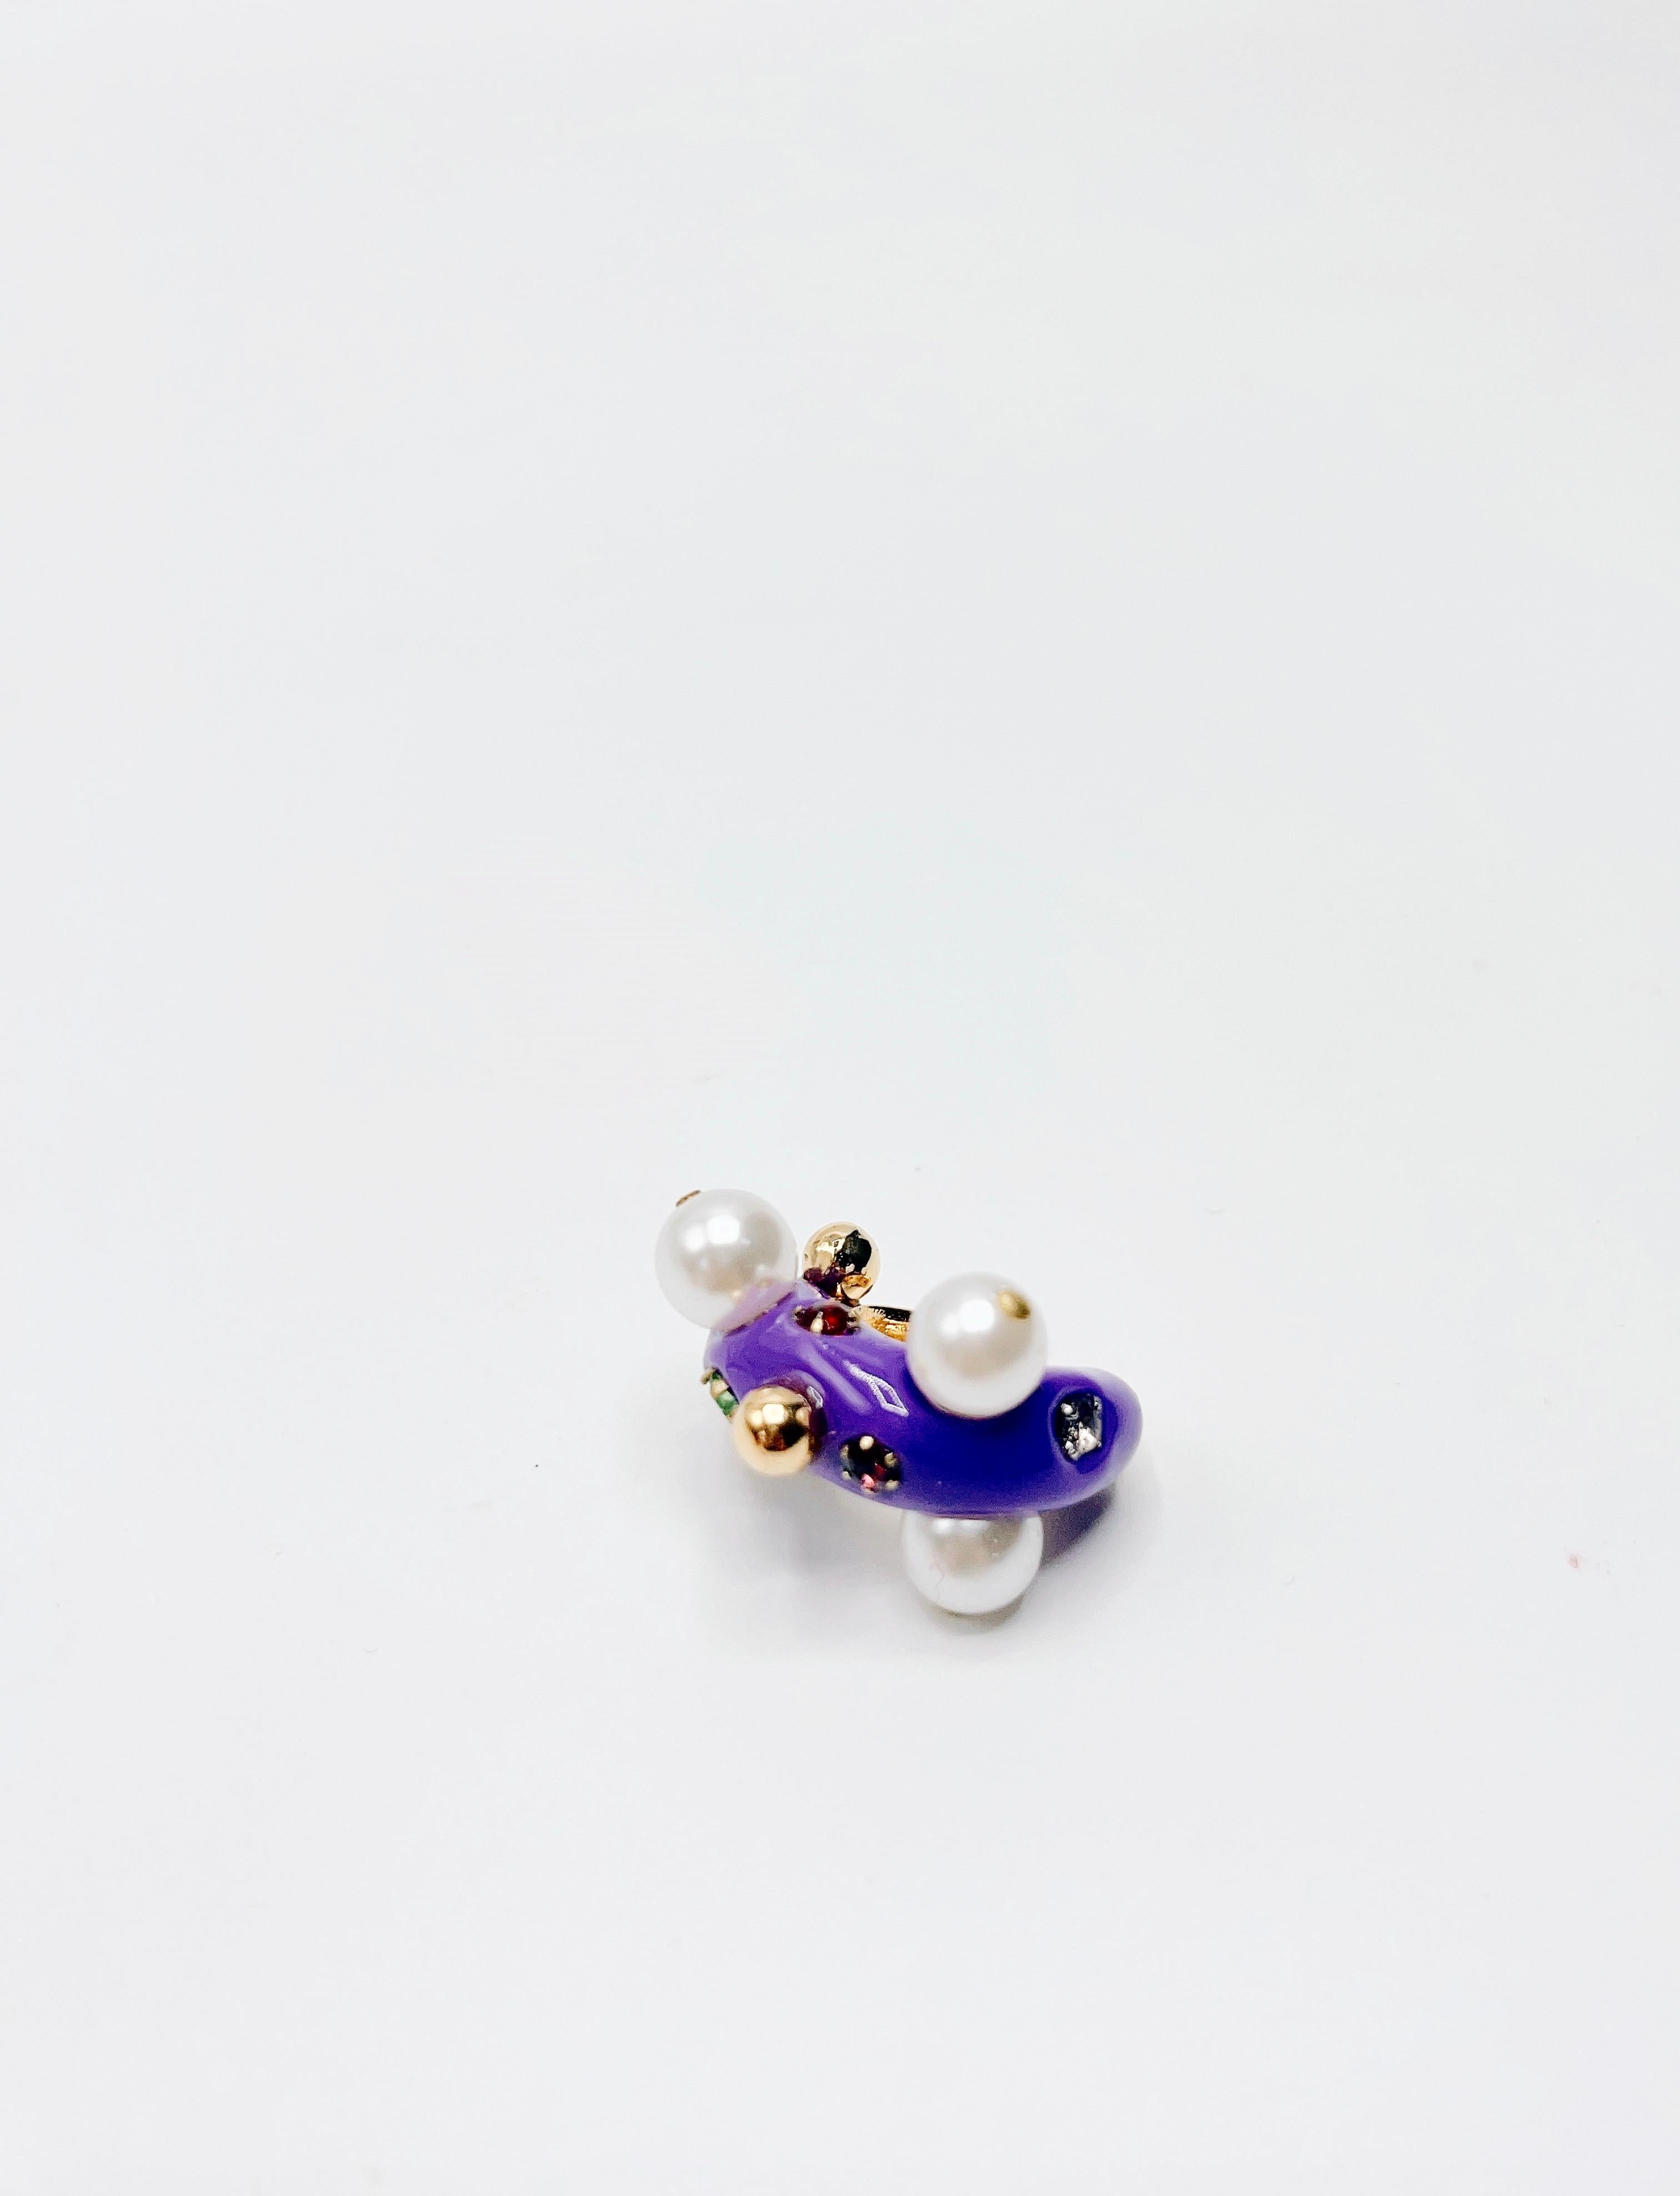 Work Serial No. 1110301235002
This item is Single Ear-cuff.

Hannayoo Works has created the Hand-Crafted Ear-Objects.
 Teardrops ear cuffs were found passing the Pandemic, hoping all tears turn to happiness. The primary material of the Objects is